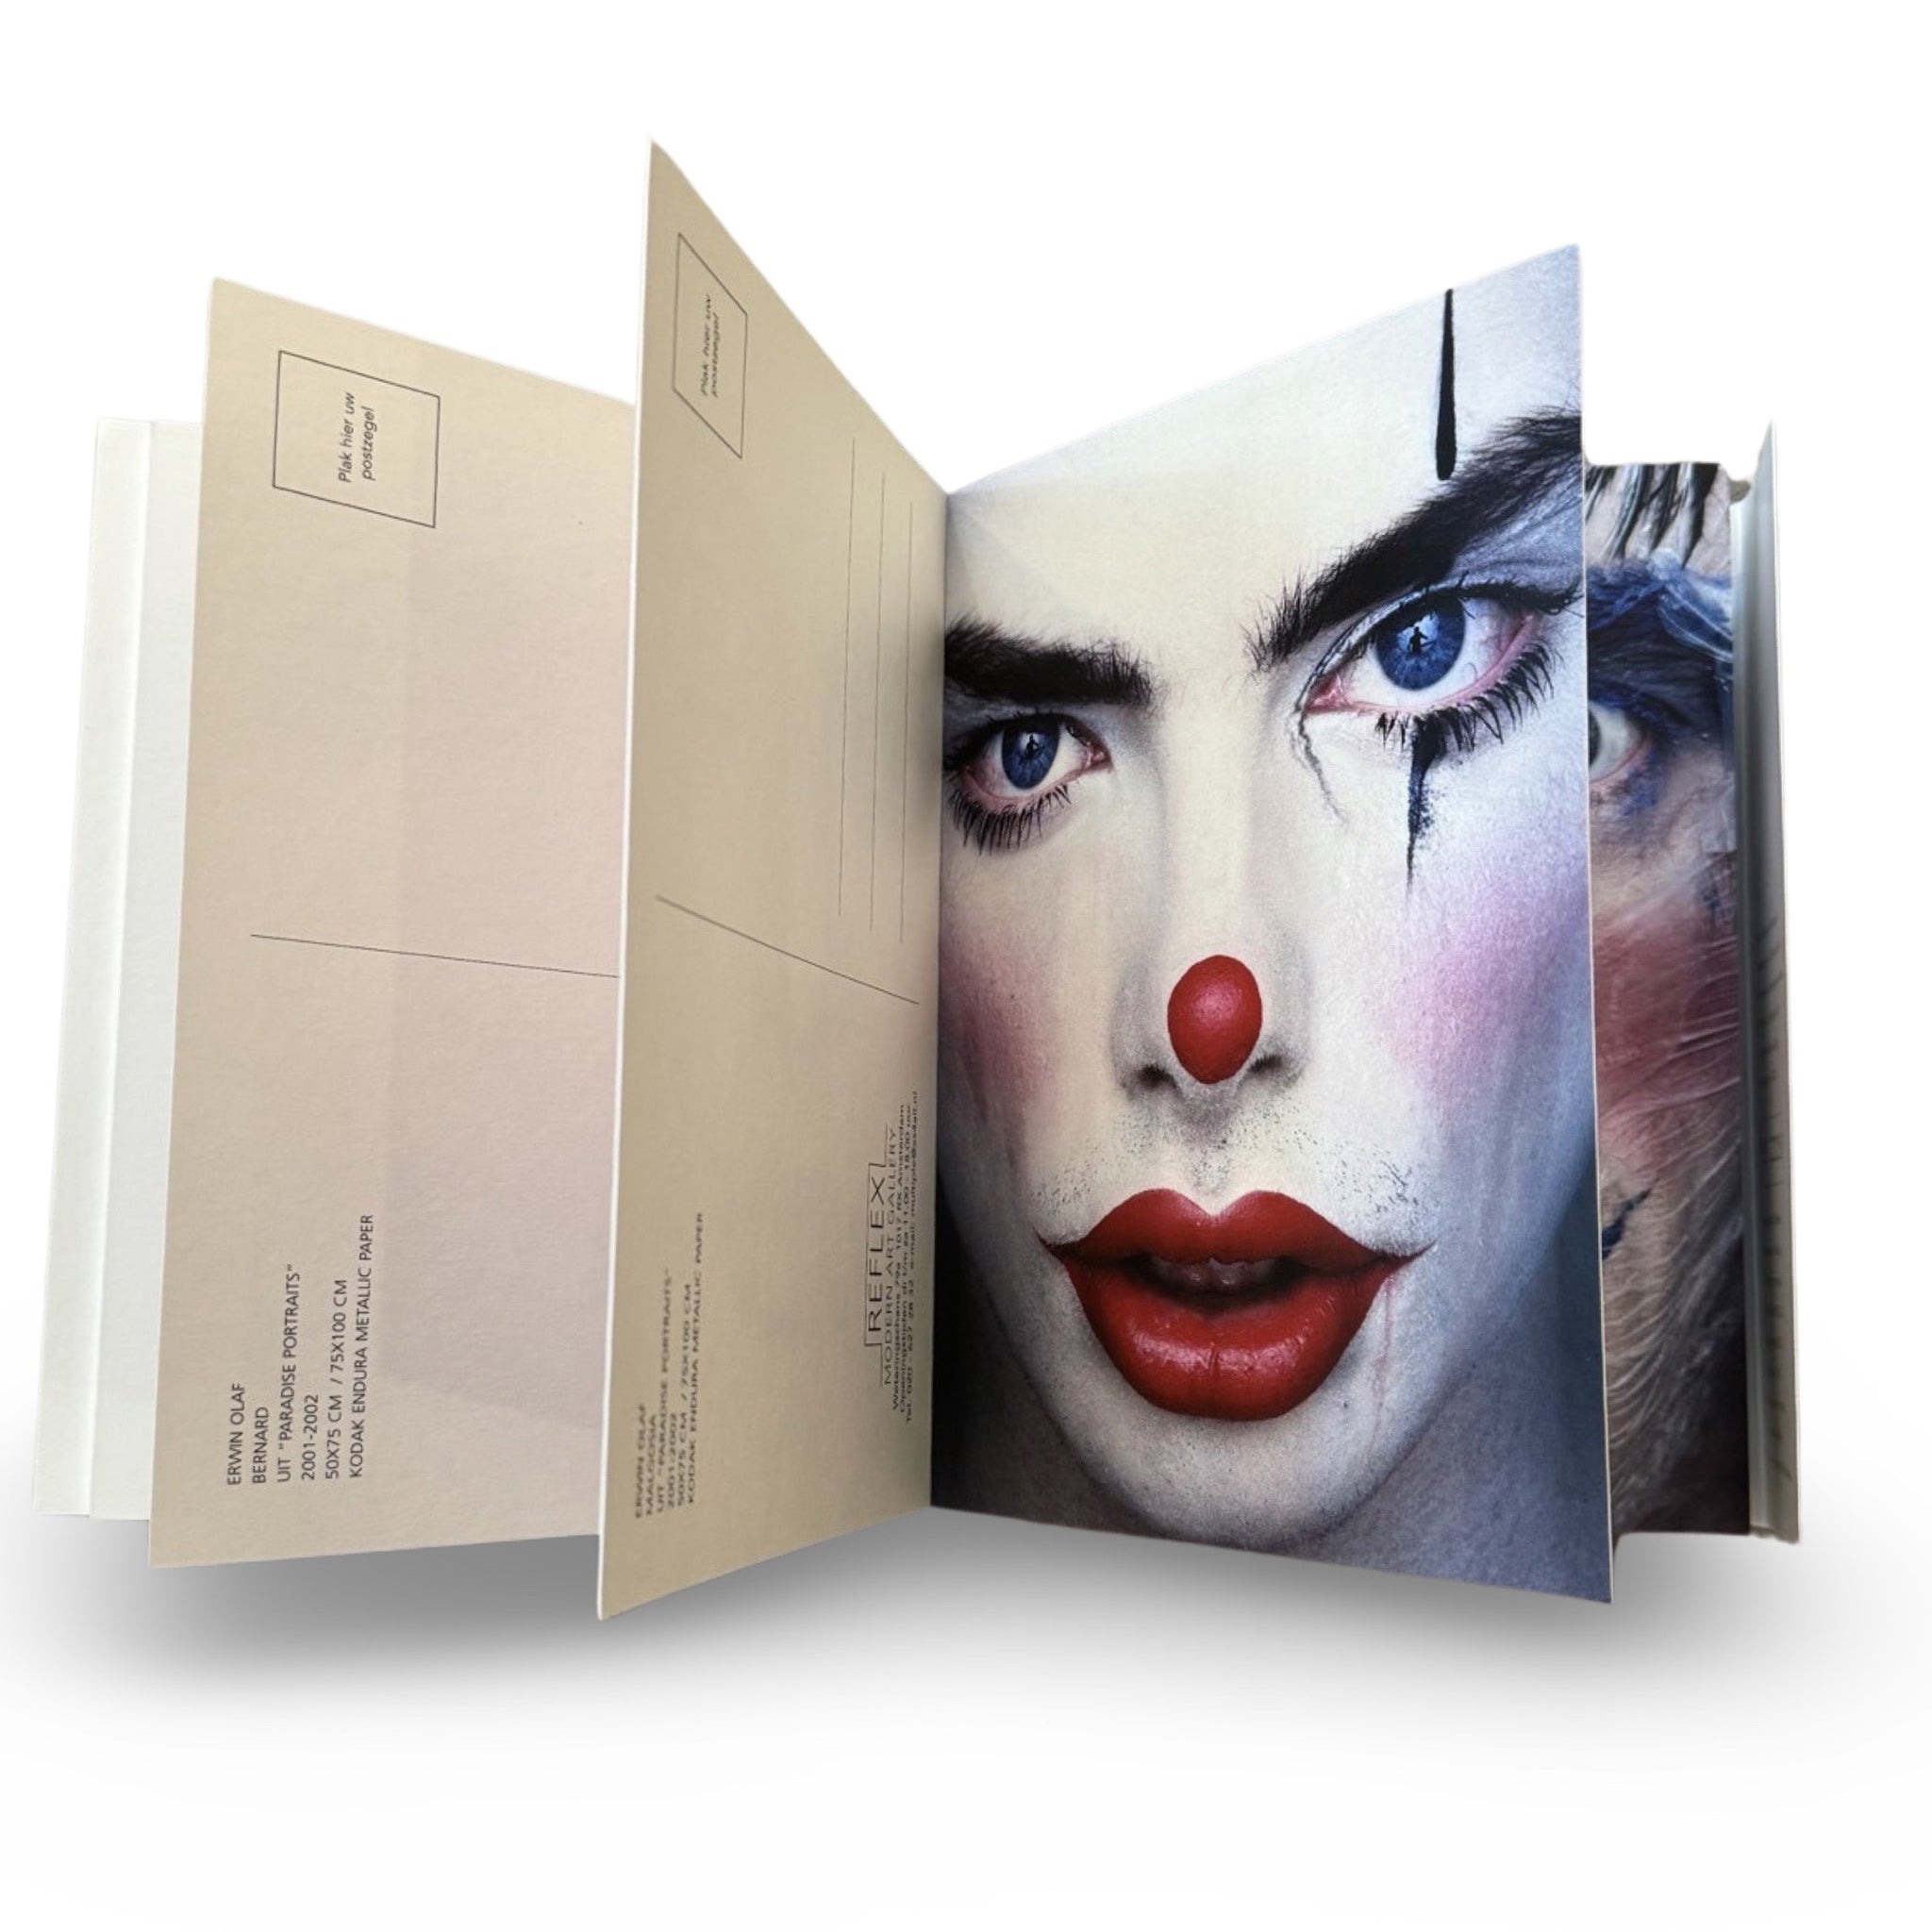 Erwin Olaf - Paradise Portraits, Renee | complimentary Paradise Portraits collectors book included